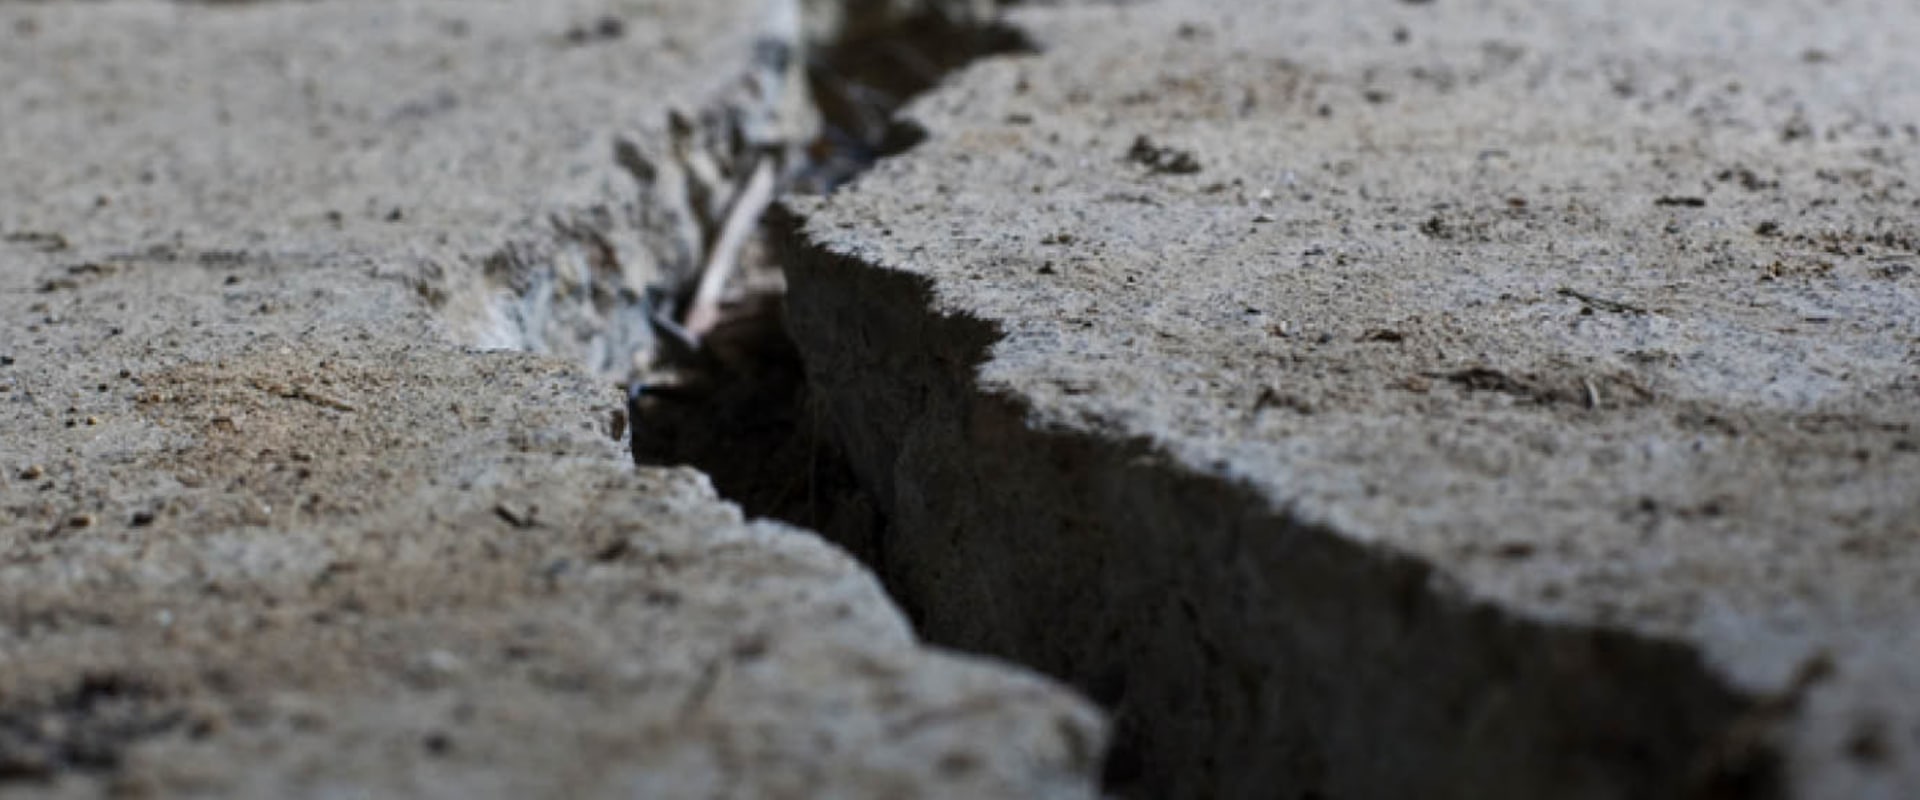 What causes concrete to crumble?